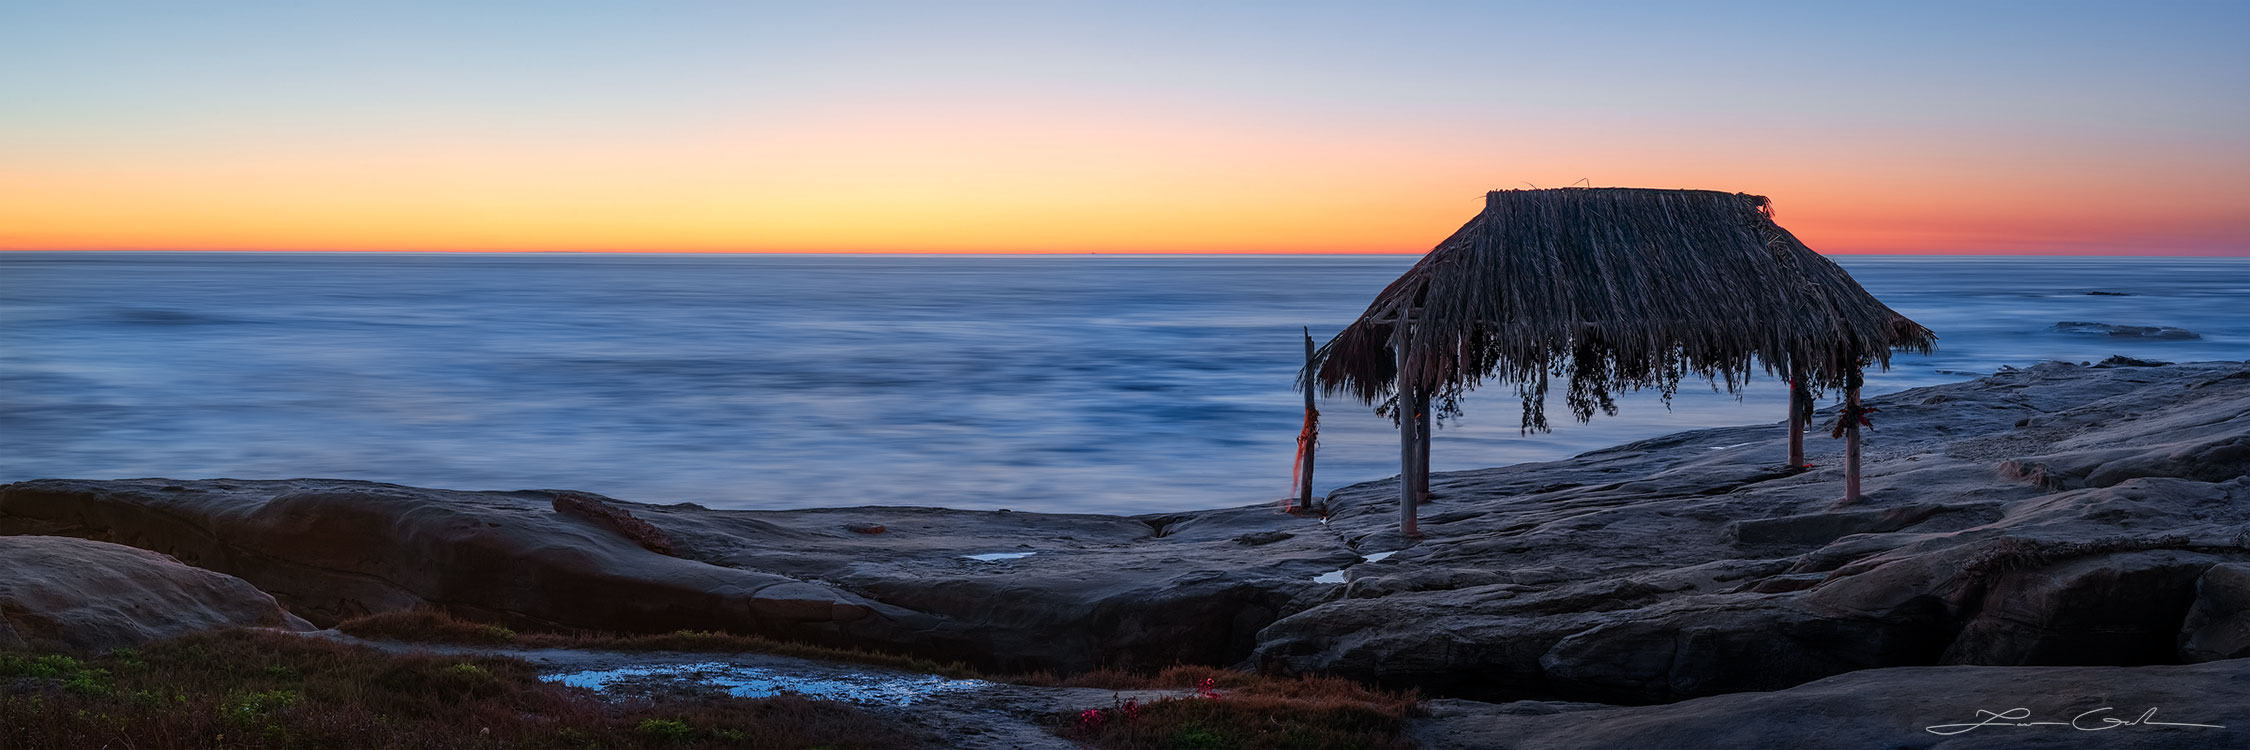 A slow motion ocean panorama with a rocky shore and a beautiful gazebo after sunset with orange colors in the sky near La Jolla, California - Gintchin Fine Art